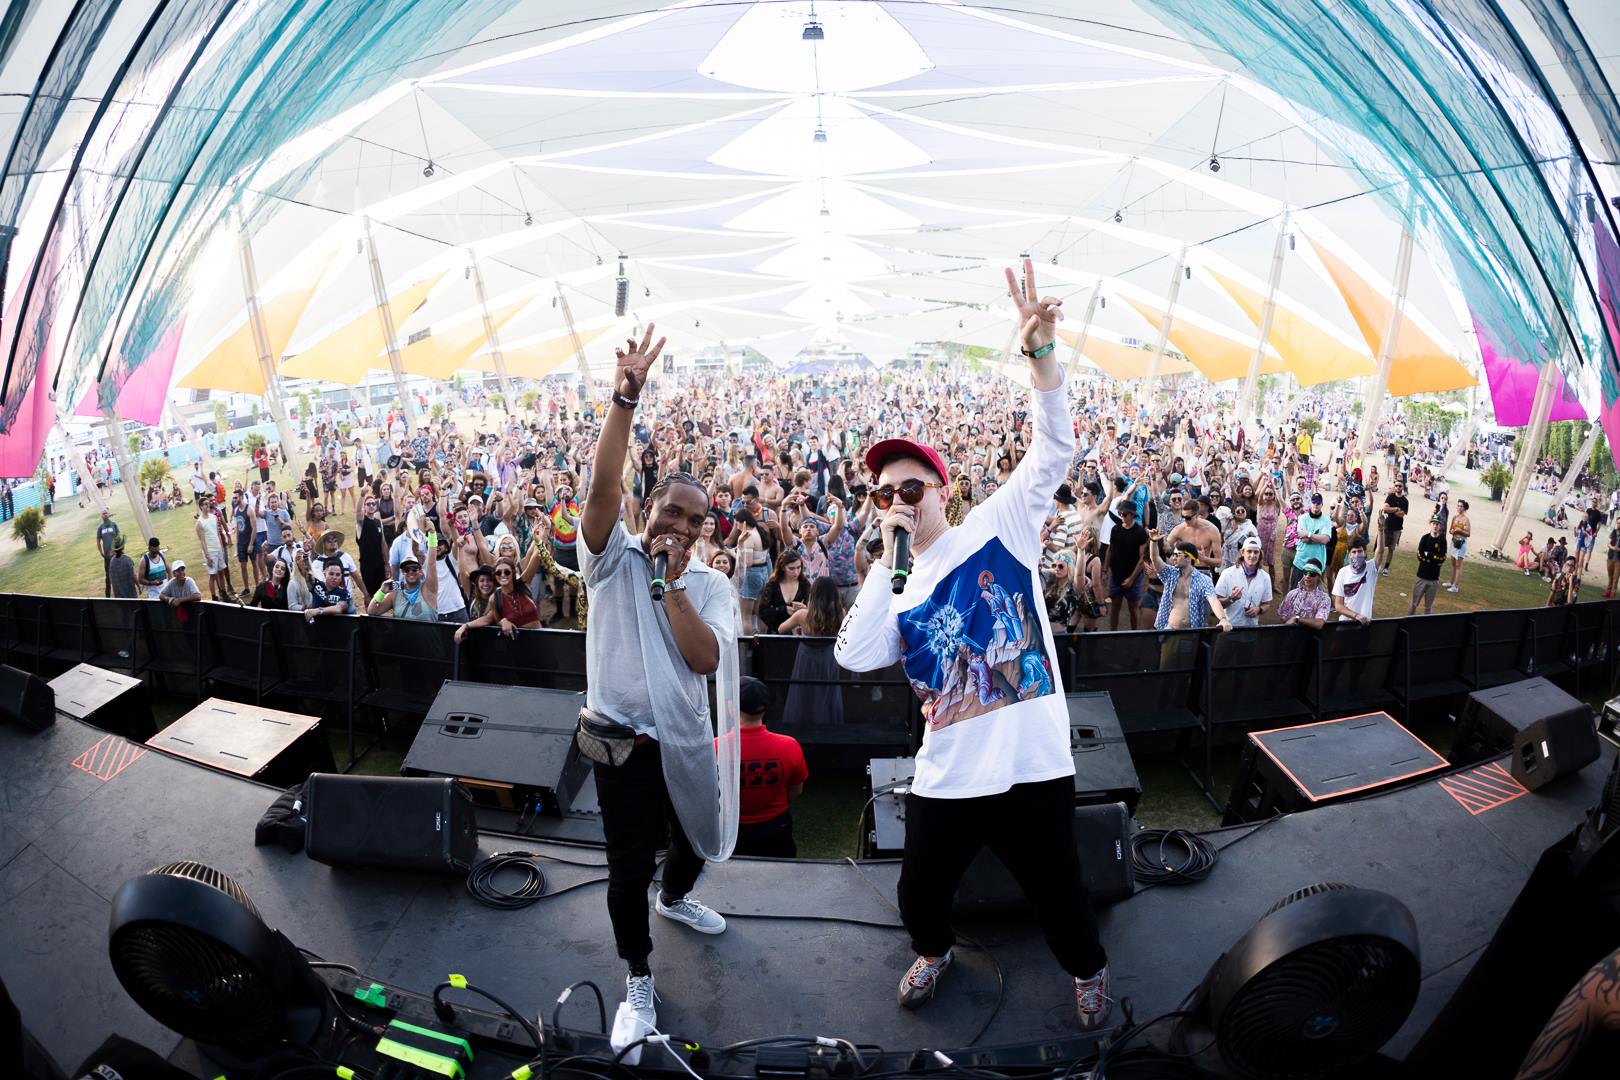 Holly at Coachella 2019 Do LaB Stage